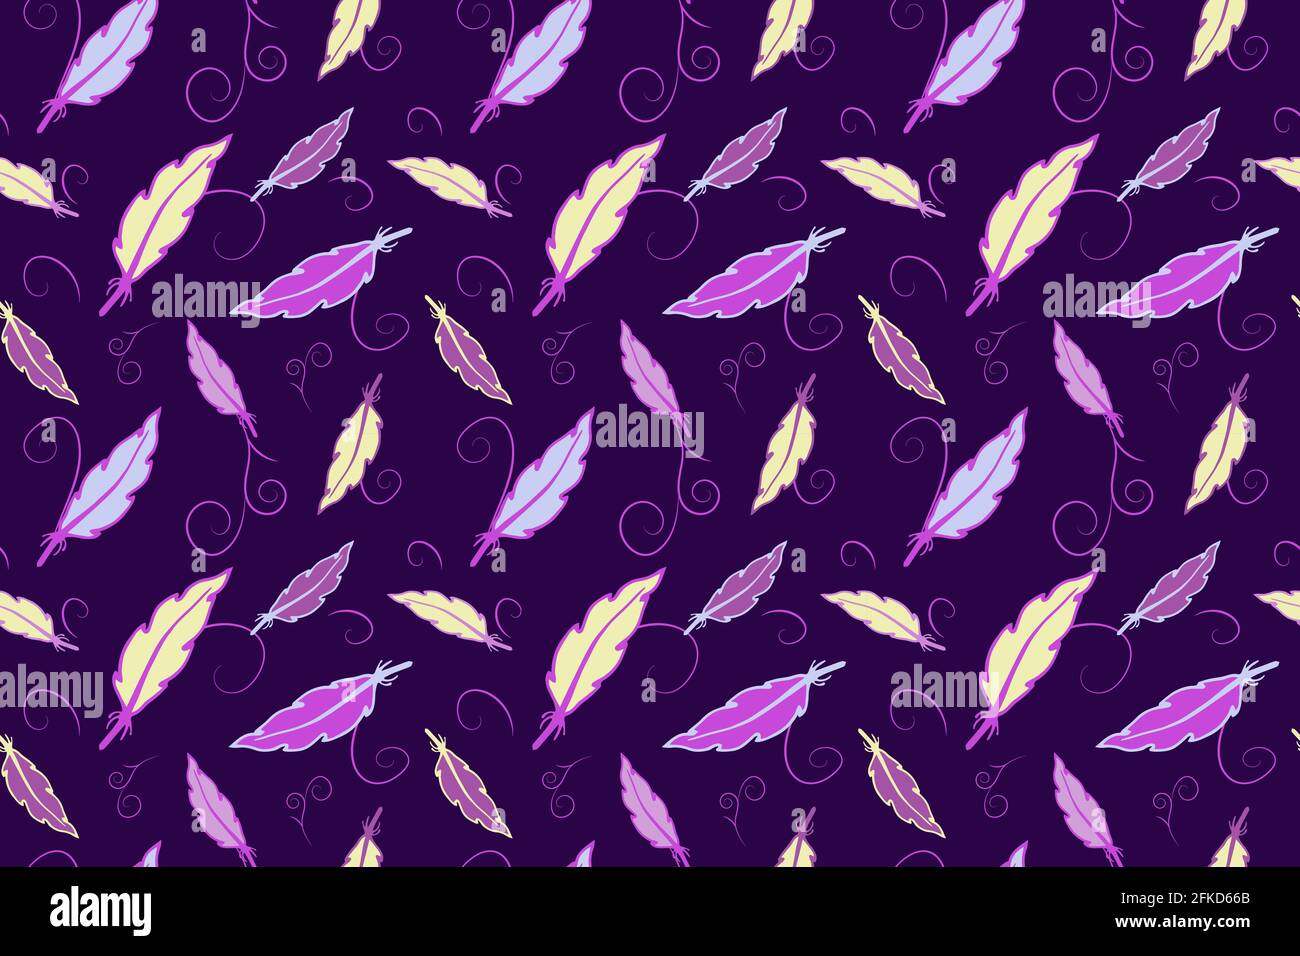 Violet dreamy feather pattern Stock Vector